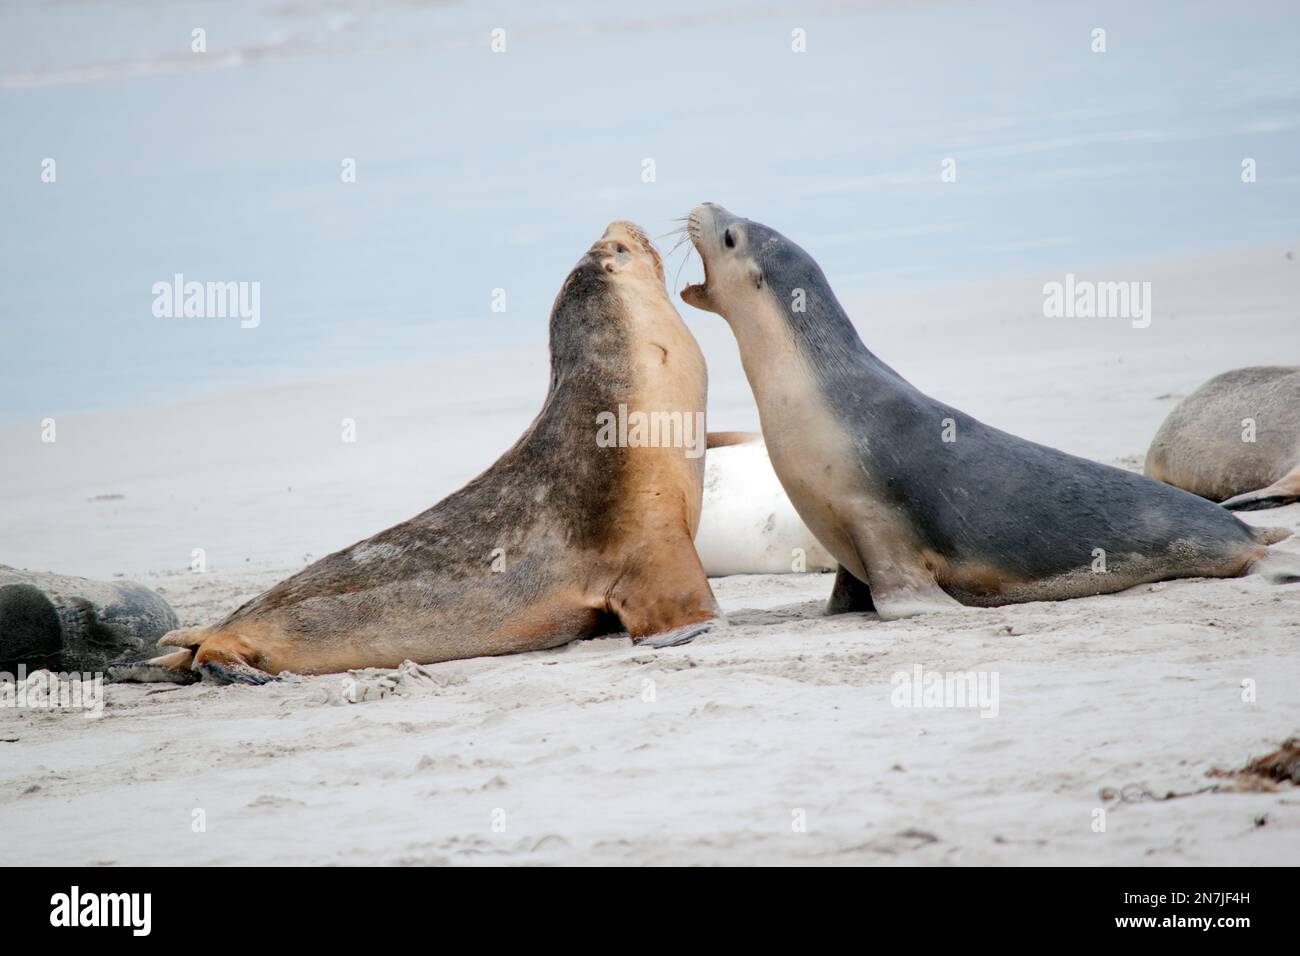 the two sea lions pups are fighting on the beach Stock Photo